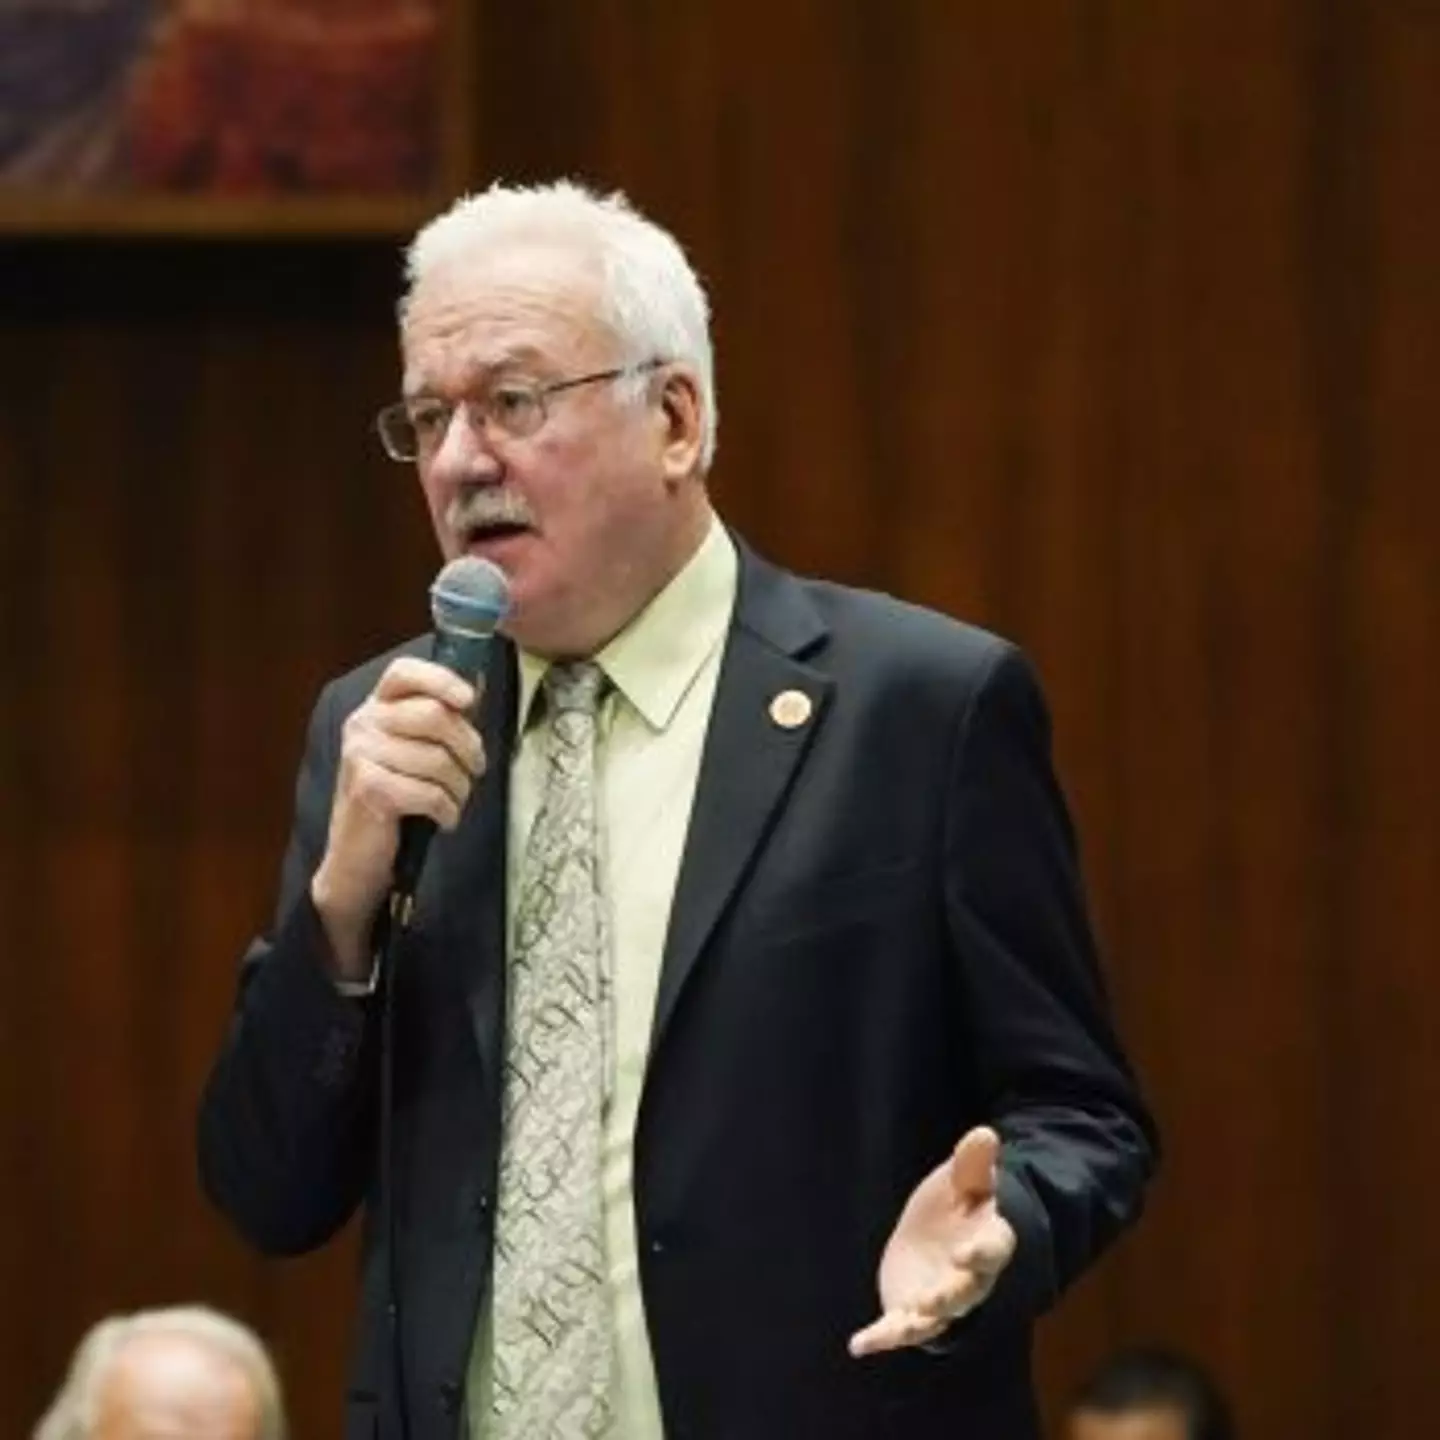 State representative John Kavanagh is sponsoring the bill citing it as 'necessary'.